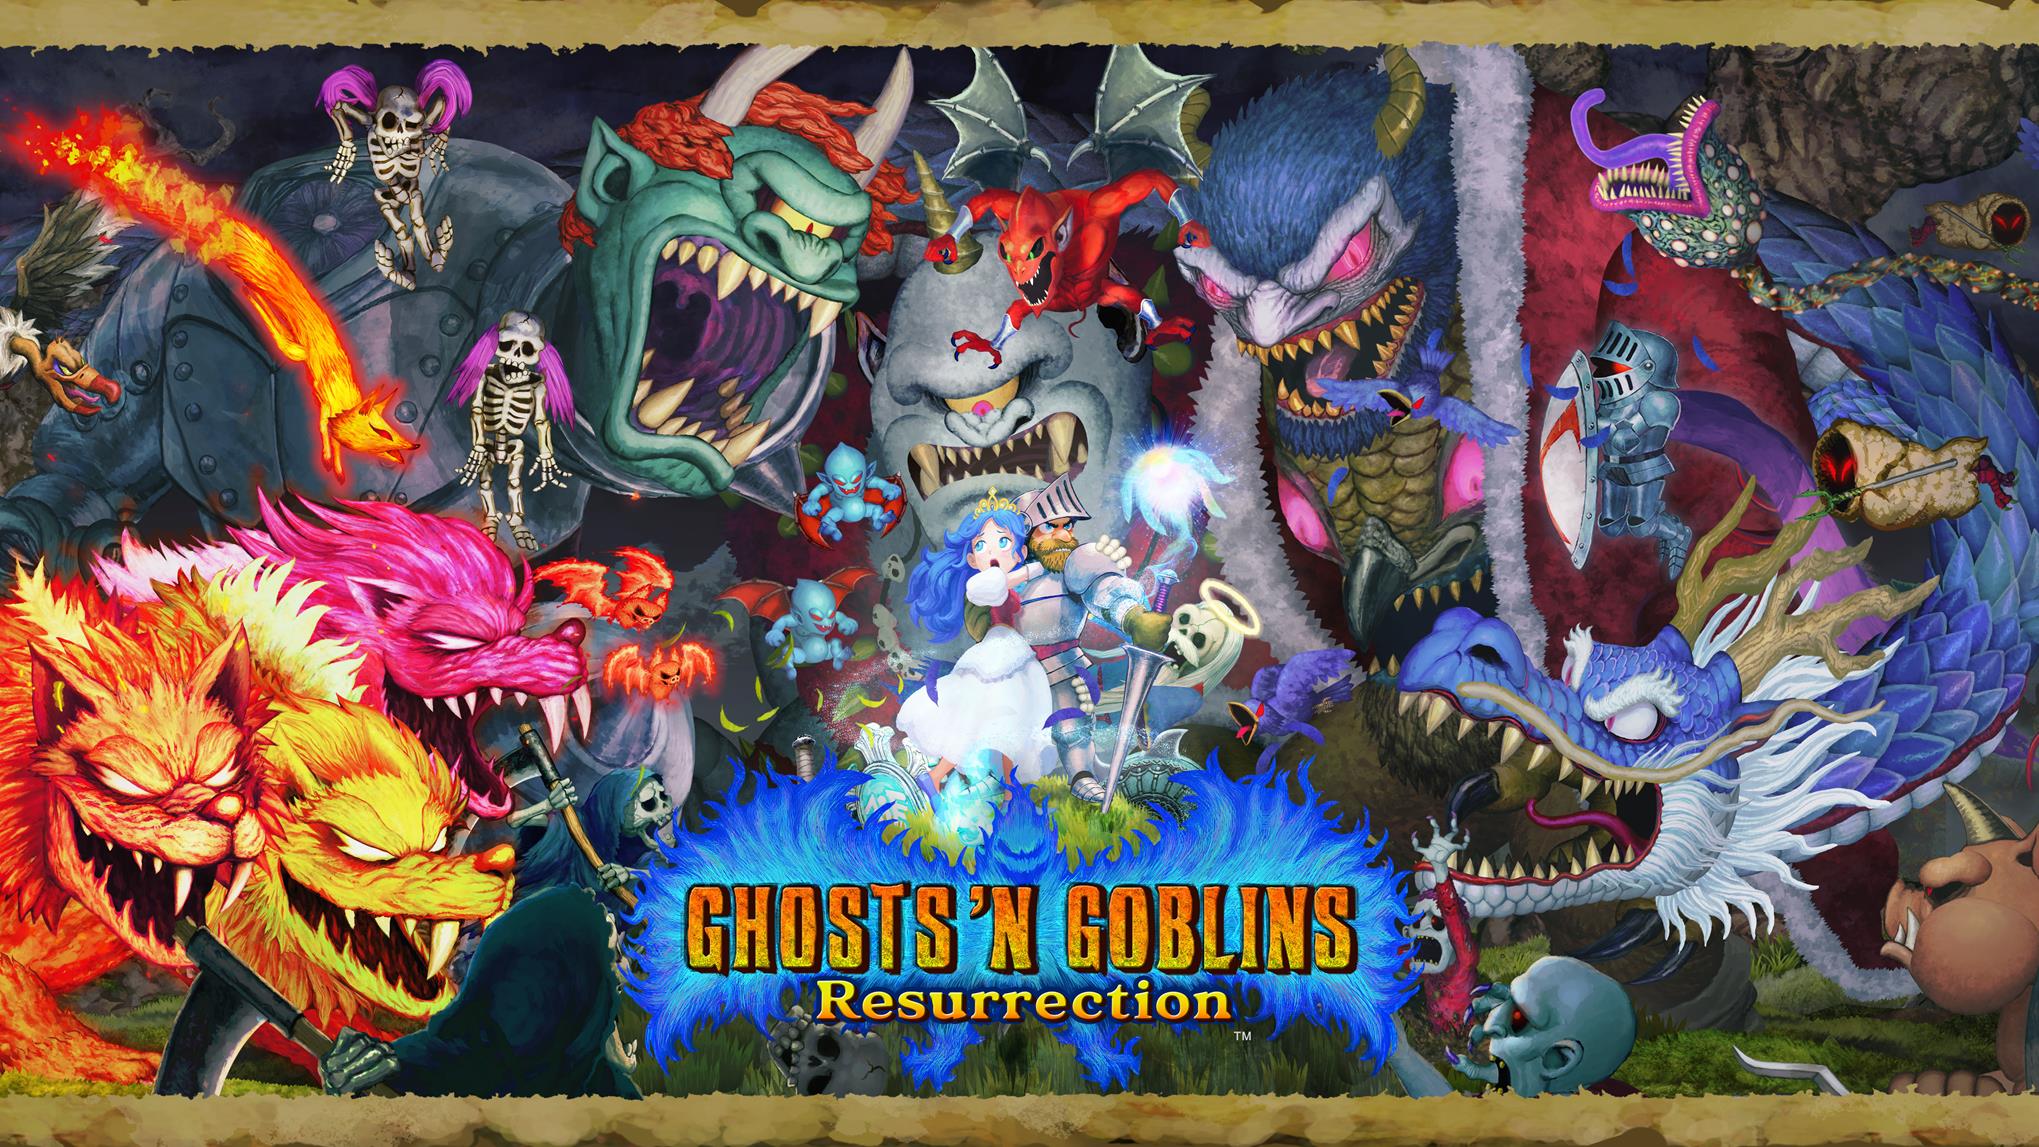 Image for Ghosts ‘n Goblins Resurrection, Capcom Arcade Stadium coming to Switch in February